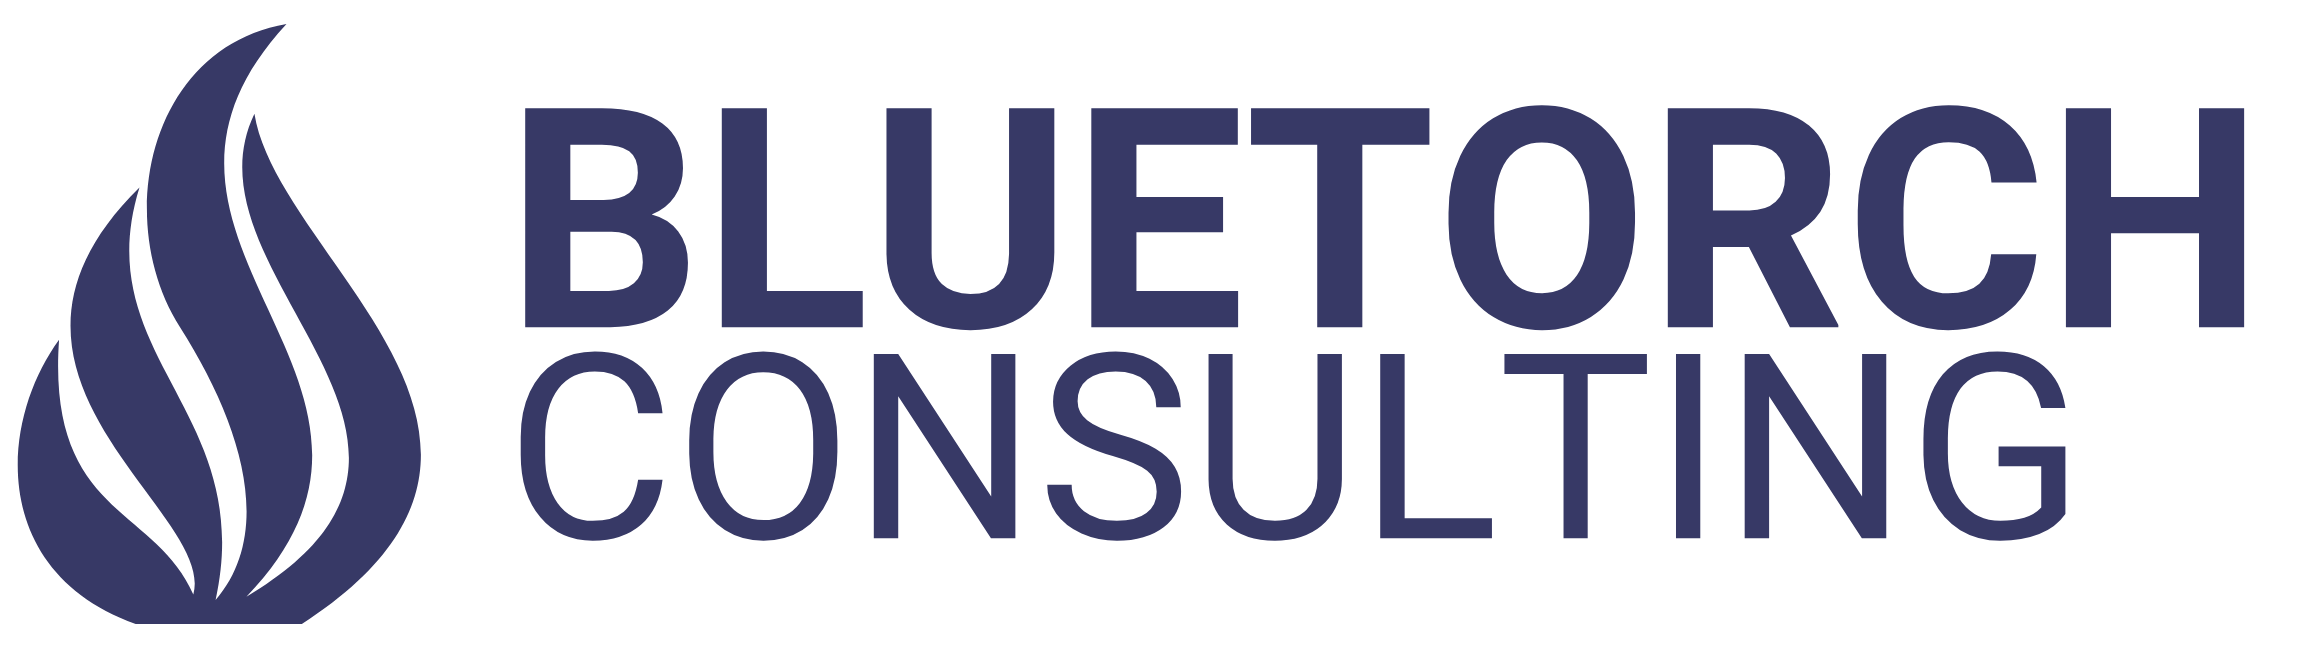 Bluetorch Consulting Logo - Full - Wide - Blue on White